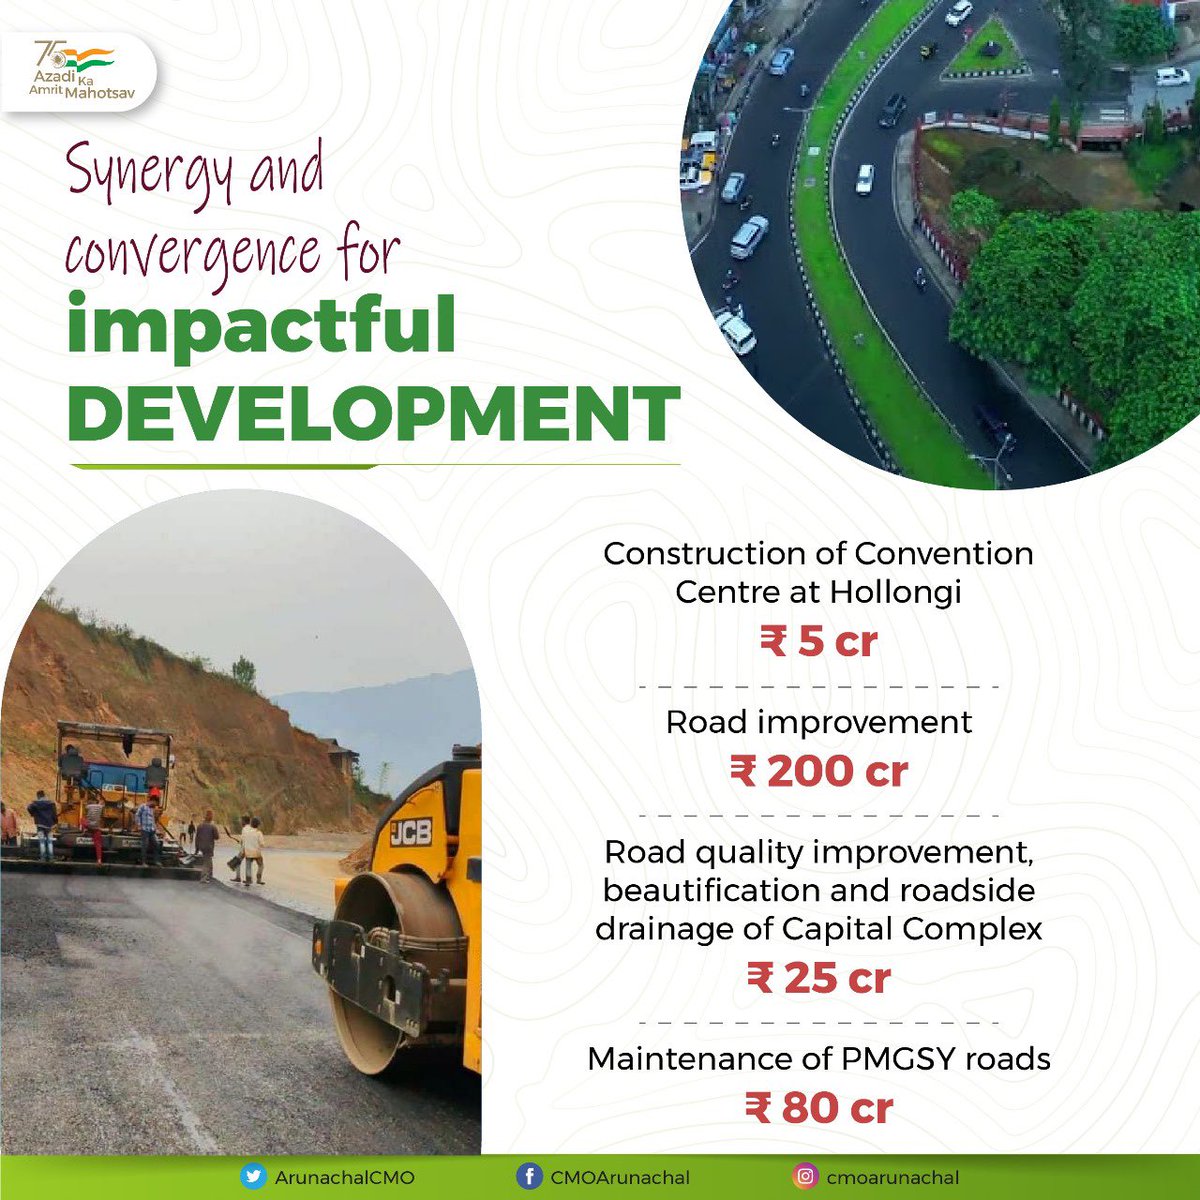 Achieving impactful development requires synergy and convergence of efforts. Unlocking the potential for the holistic progress of Arunachal Pradesh and build a future where collective action drives positive change!